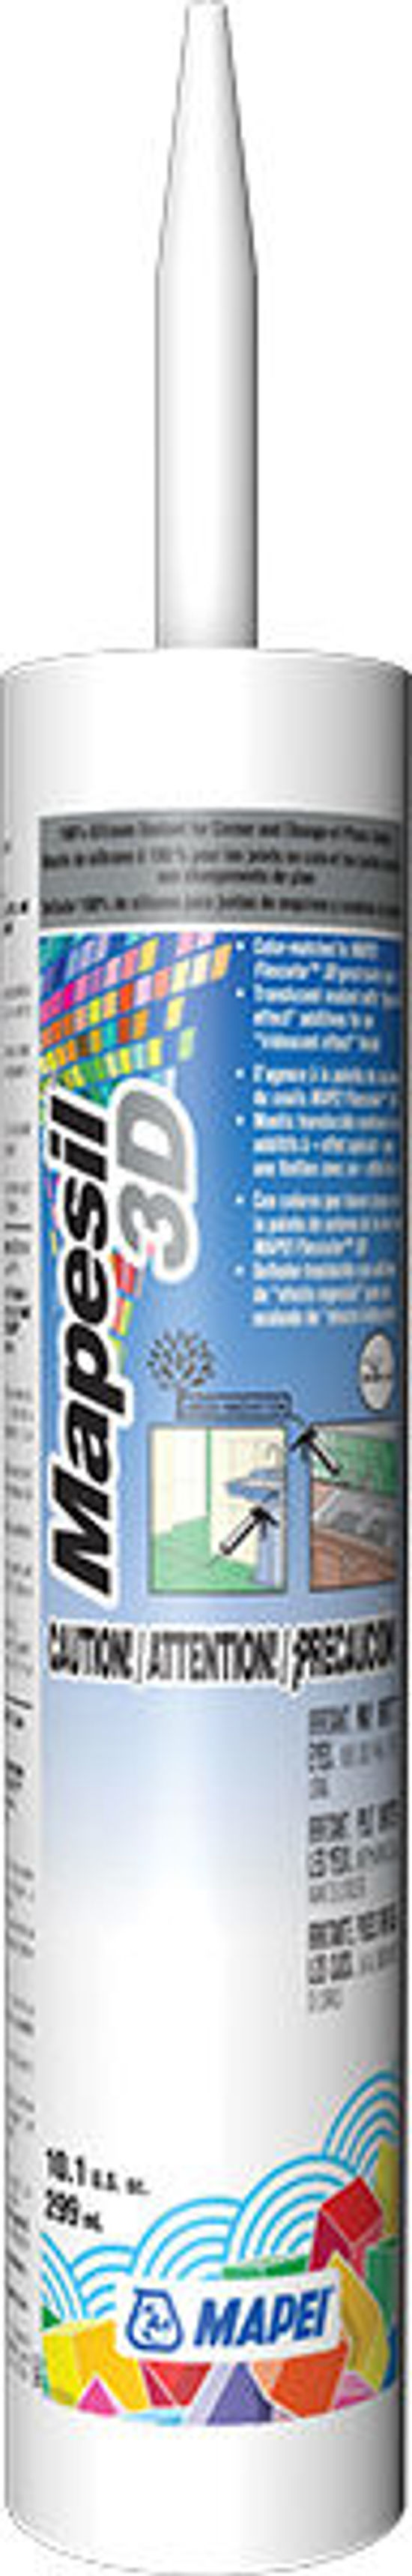 Mapesil 3D 100% Silicone Sealant with an “Iridescent Effect” #5208 Copper Dawn 10.11 oz